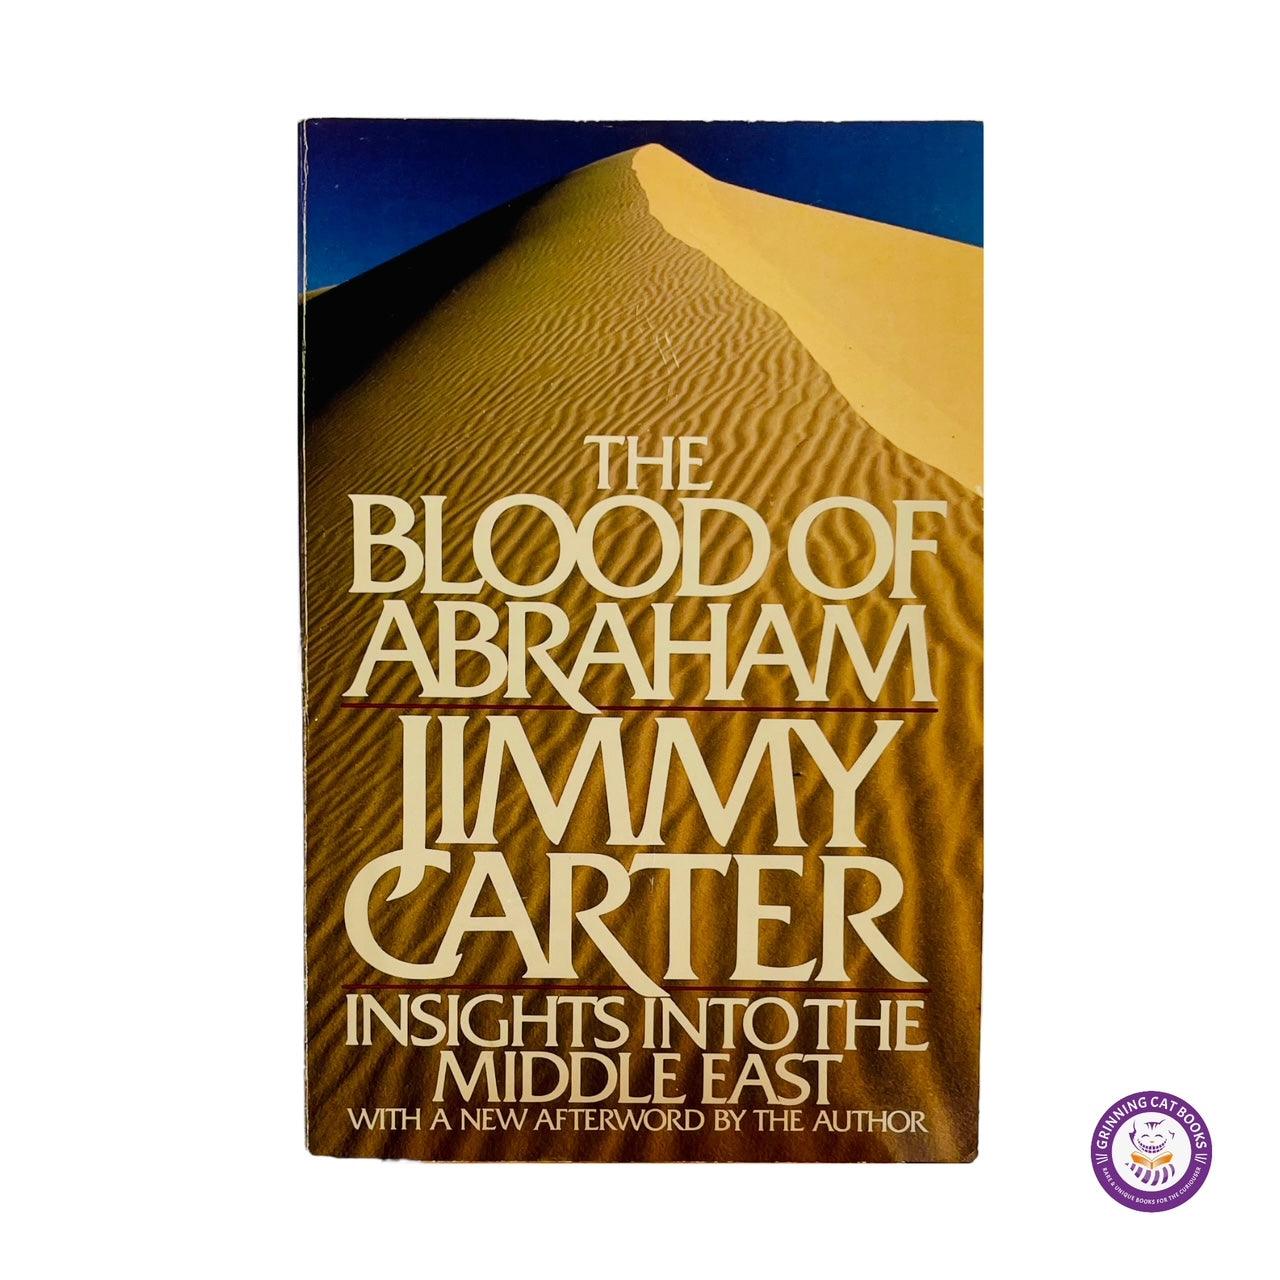 The Blood of Abraham: Insights into the Middle East (signed by President Carter) - Grinning Cat Books - books - AMERICAN HISTORY, HISTORY, JIMMY CARTER, PRESIDENTS, SIGNED